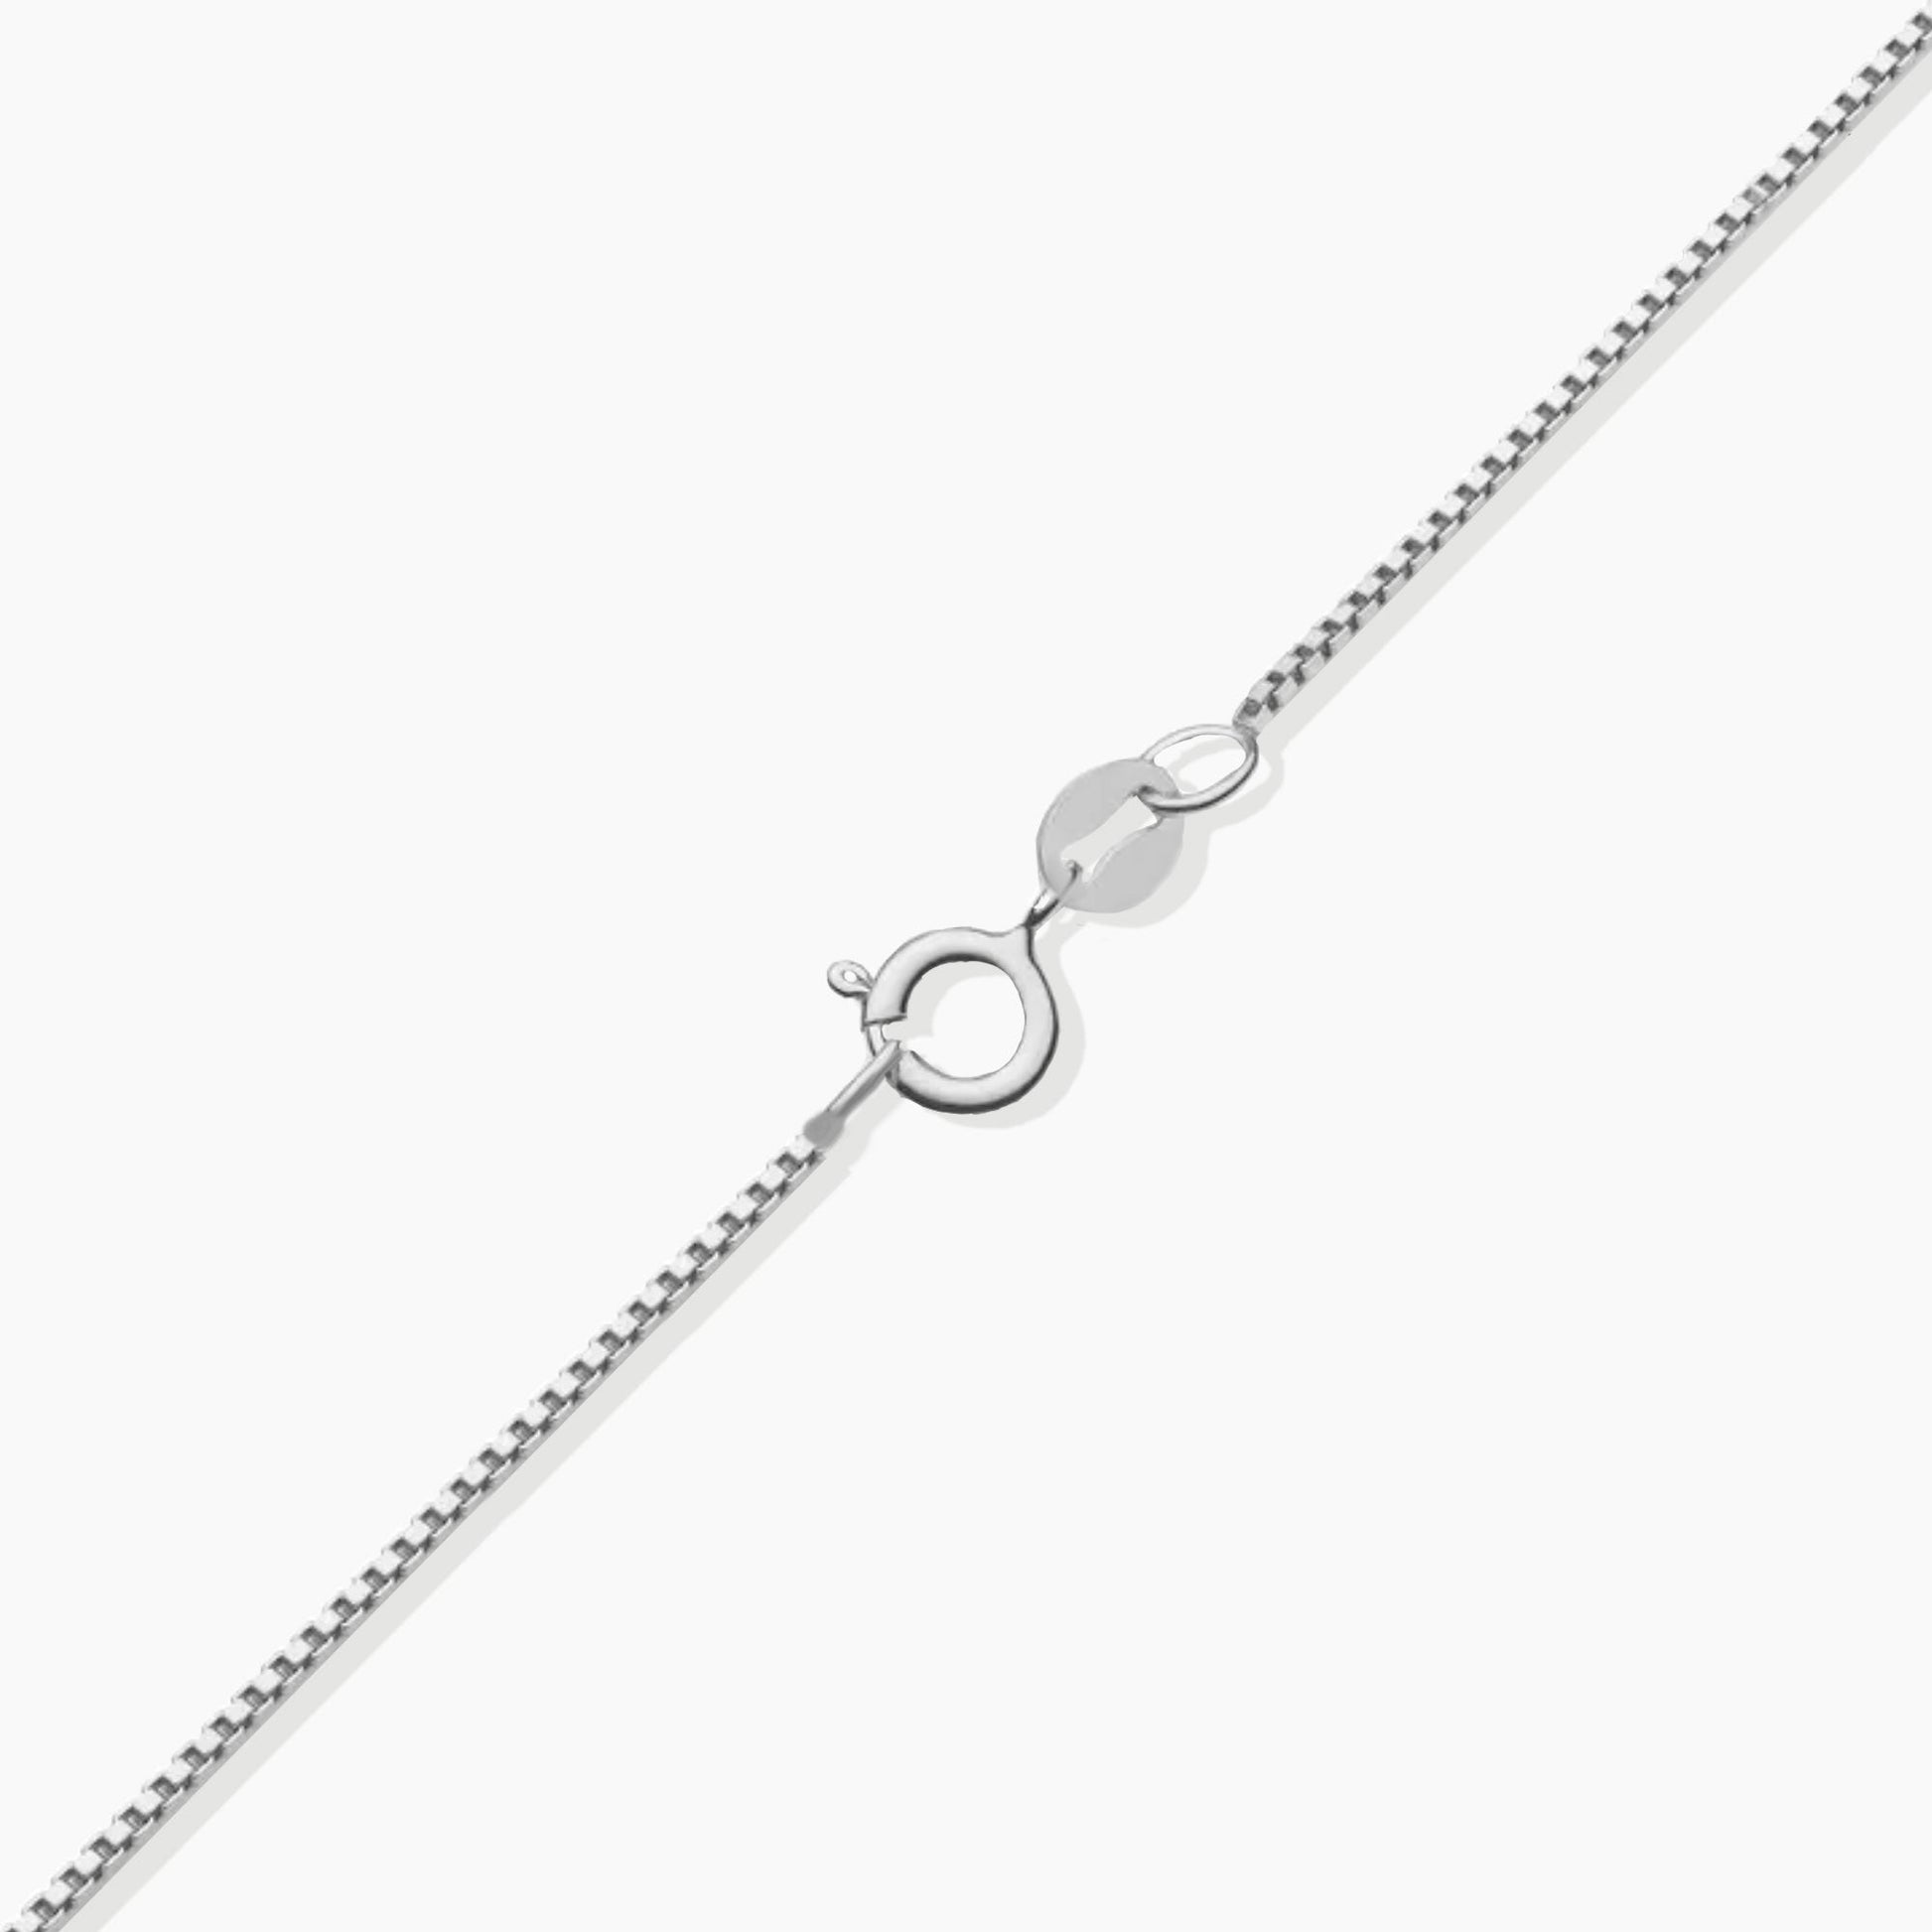 Sterling silver box chain with spring clasp, perfectly complementing the Pear Amethyst Pendant for a complete and elegant look.